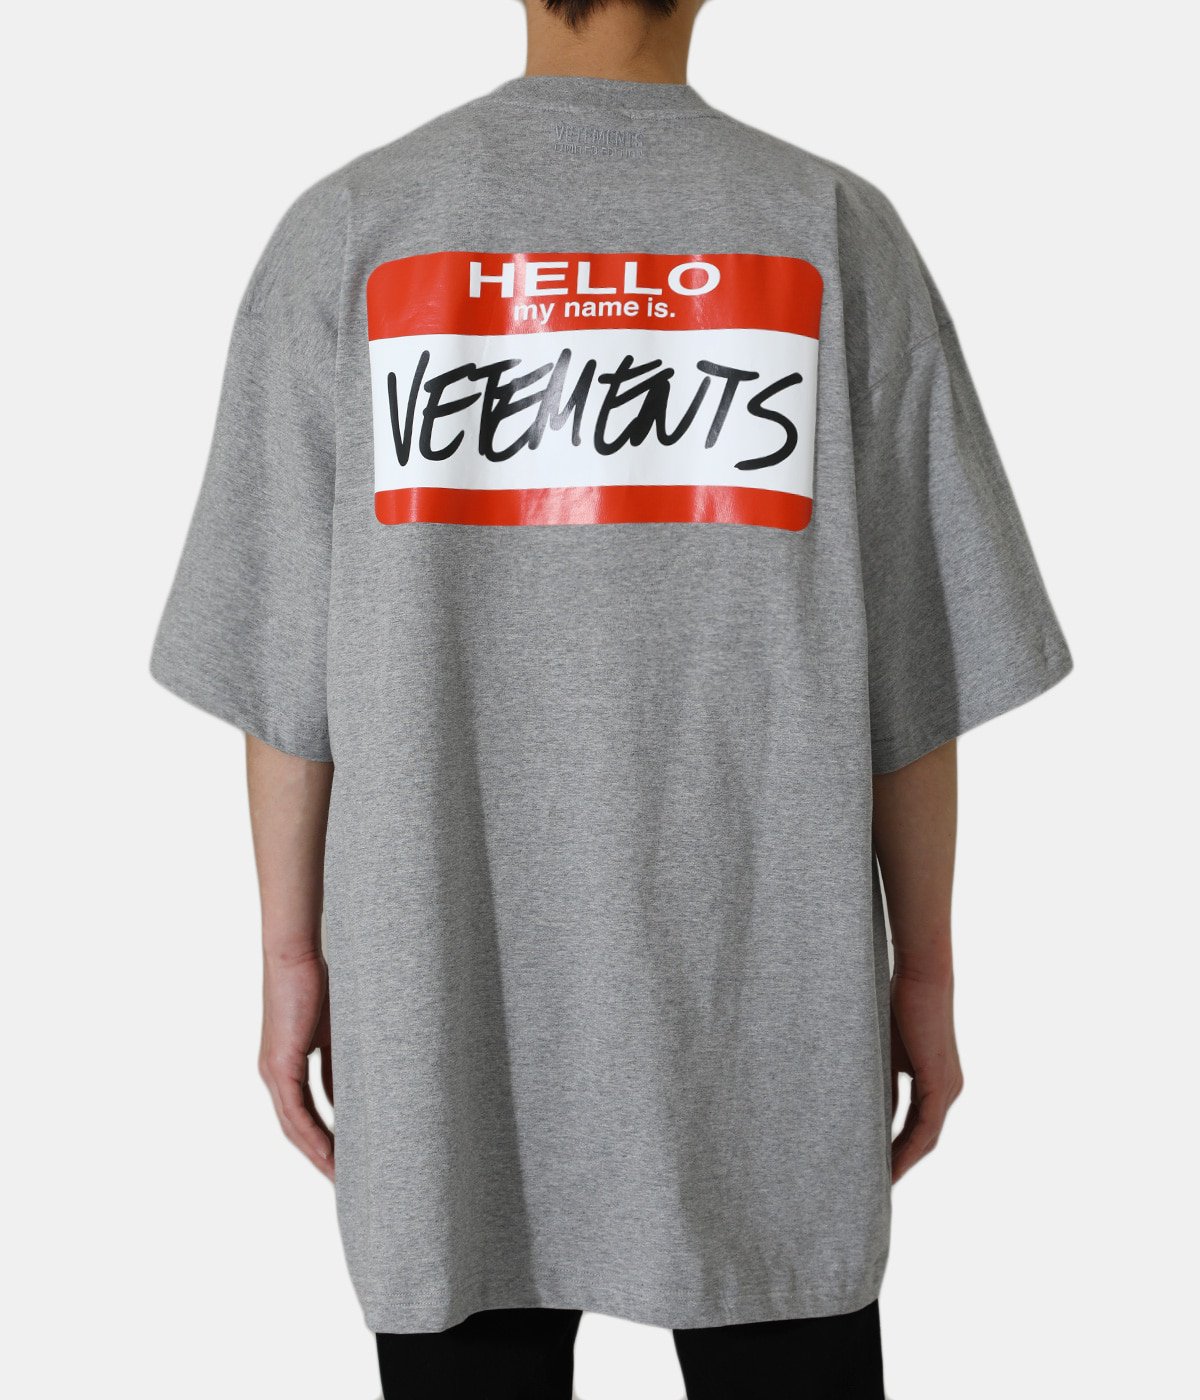 MY NAME IS VETEMENTS T-SHIRT